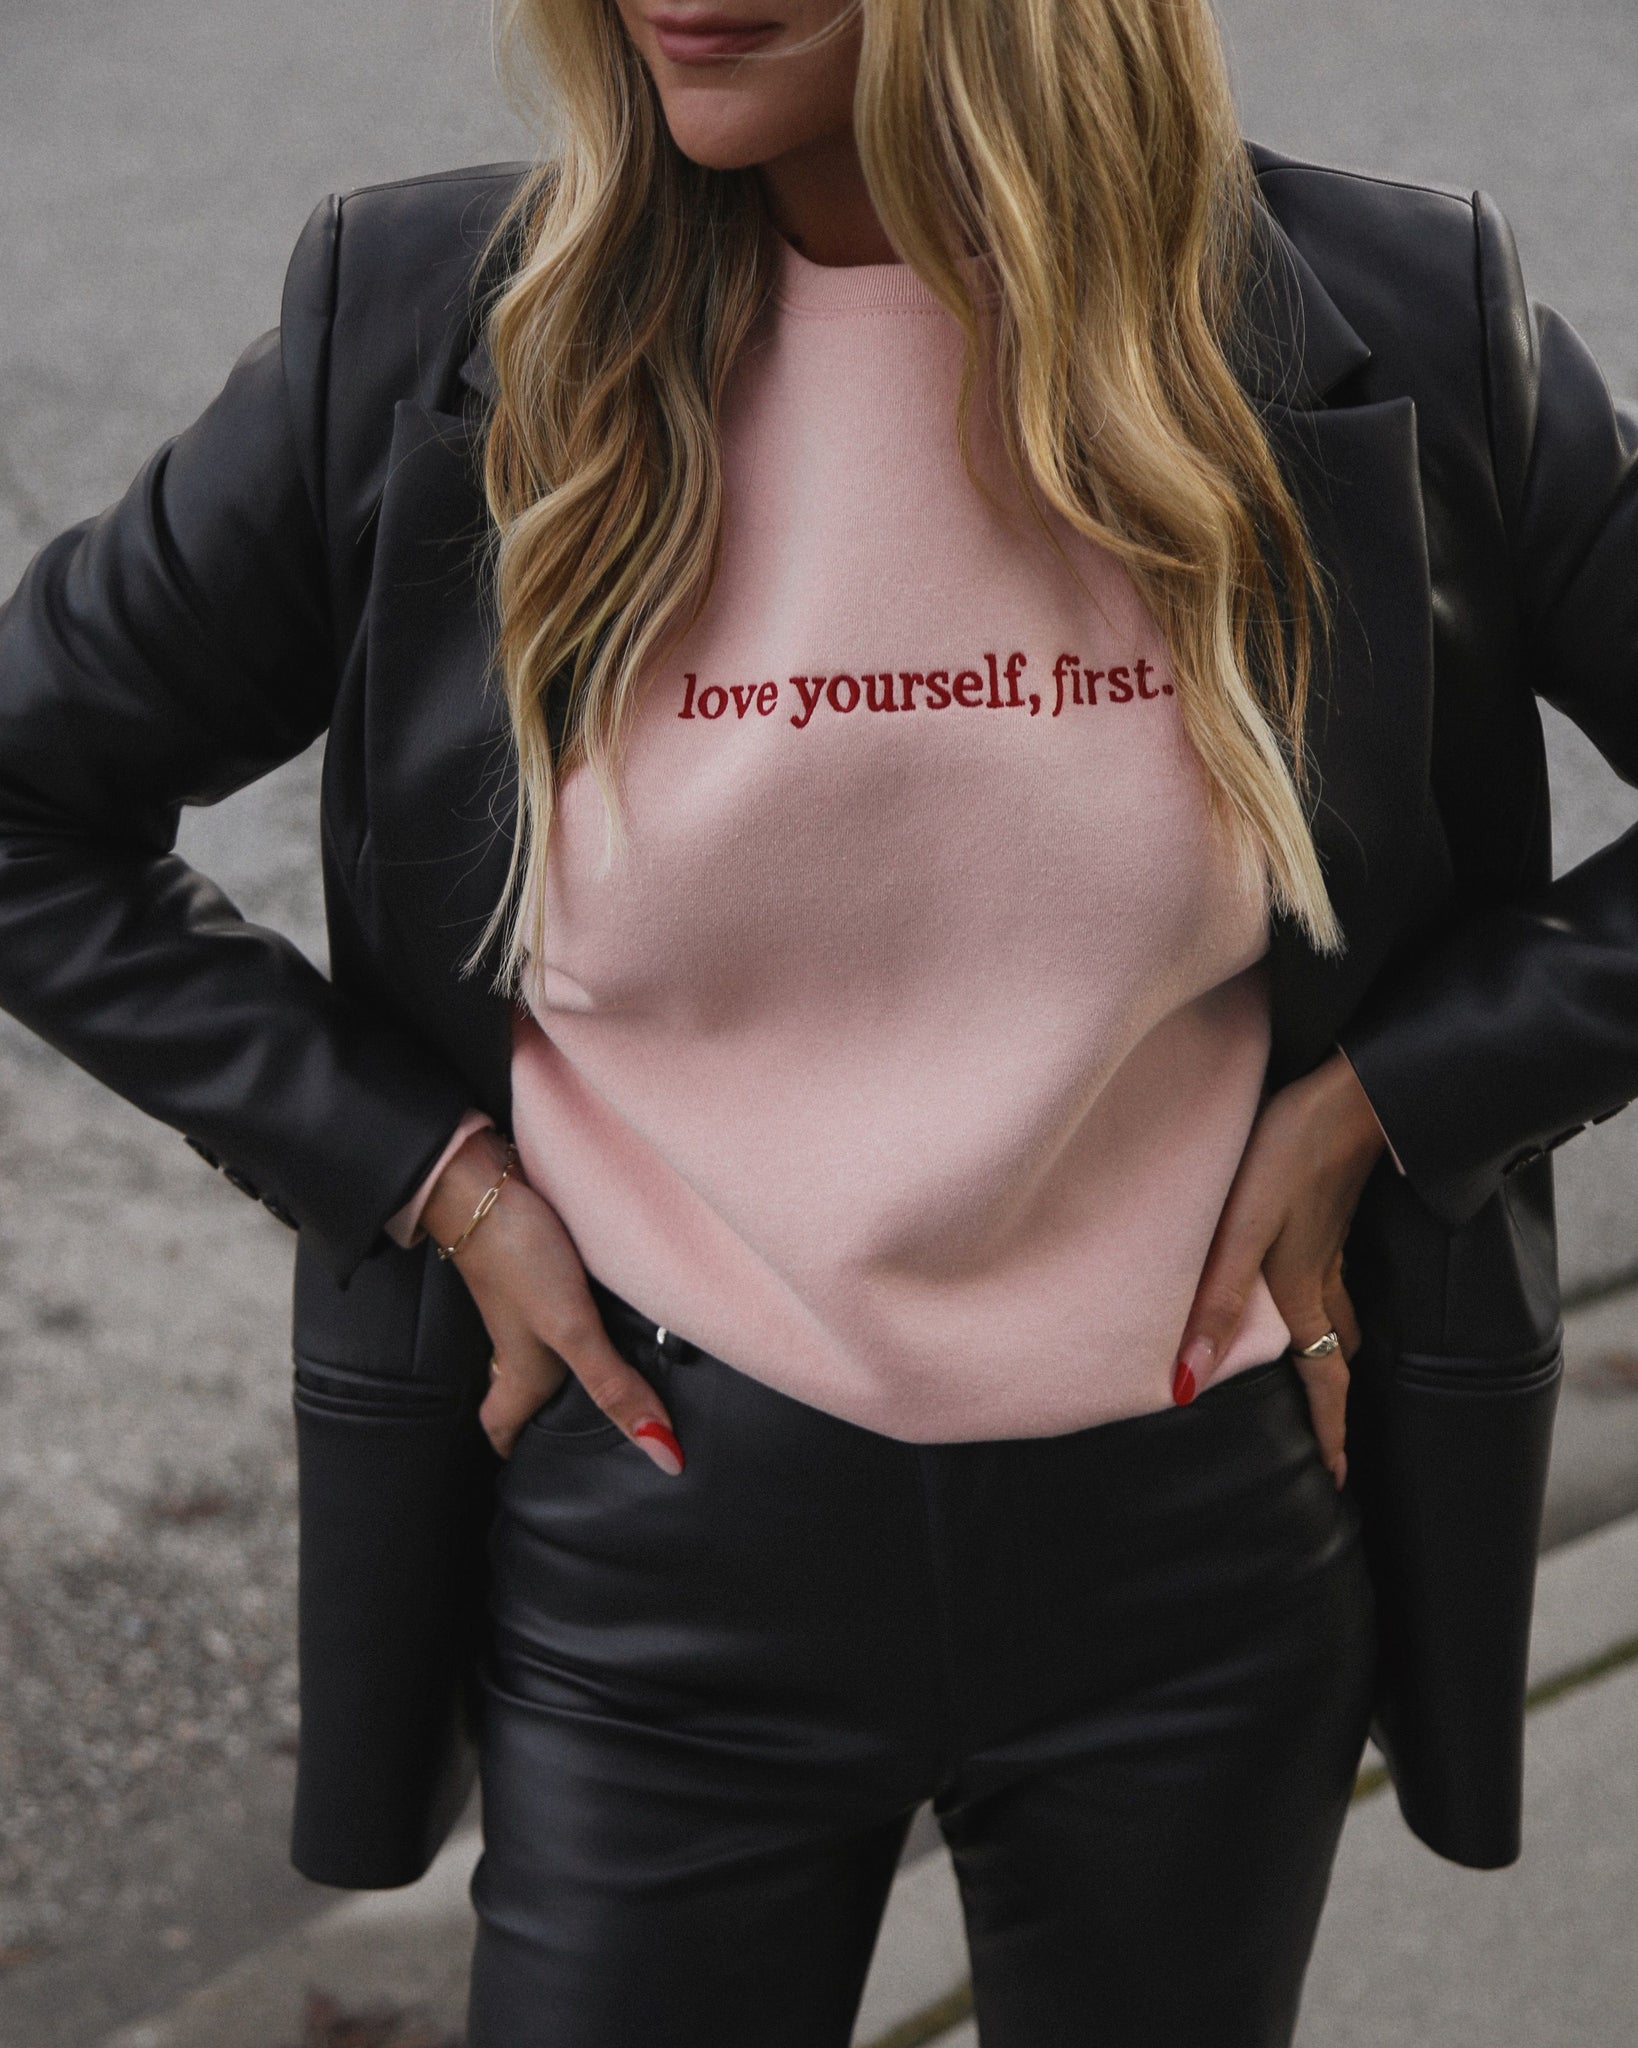 Brunette the Label - Crew - All You Need Is Self Love